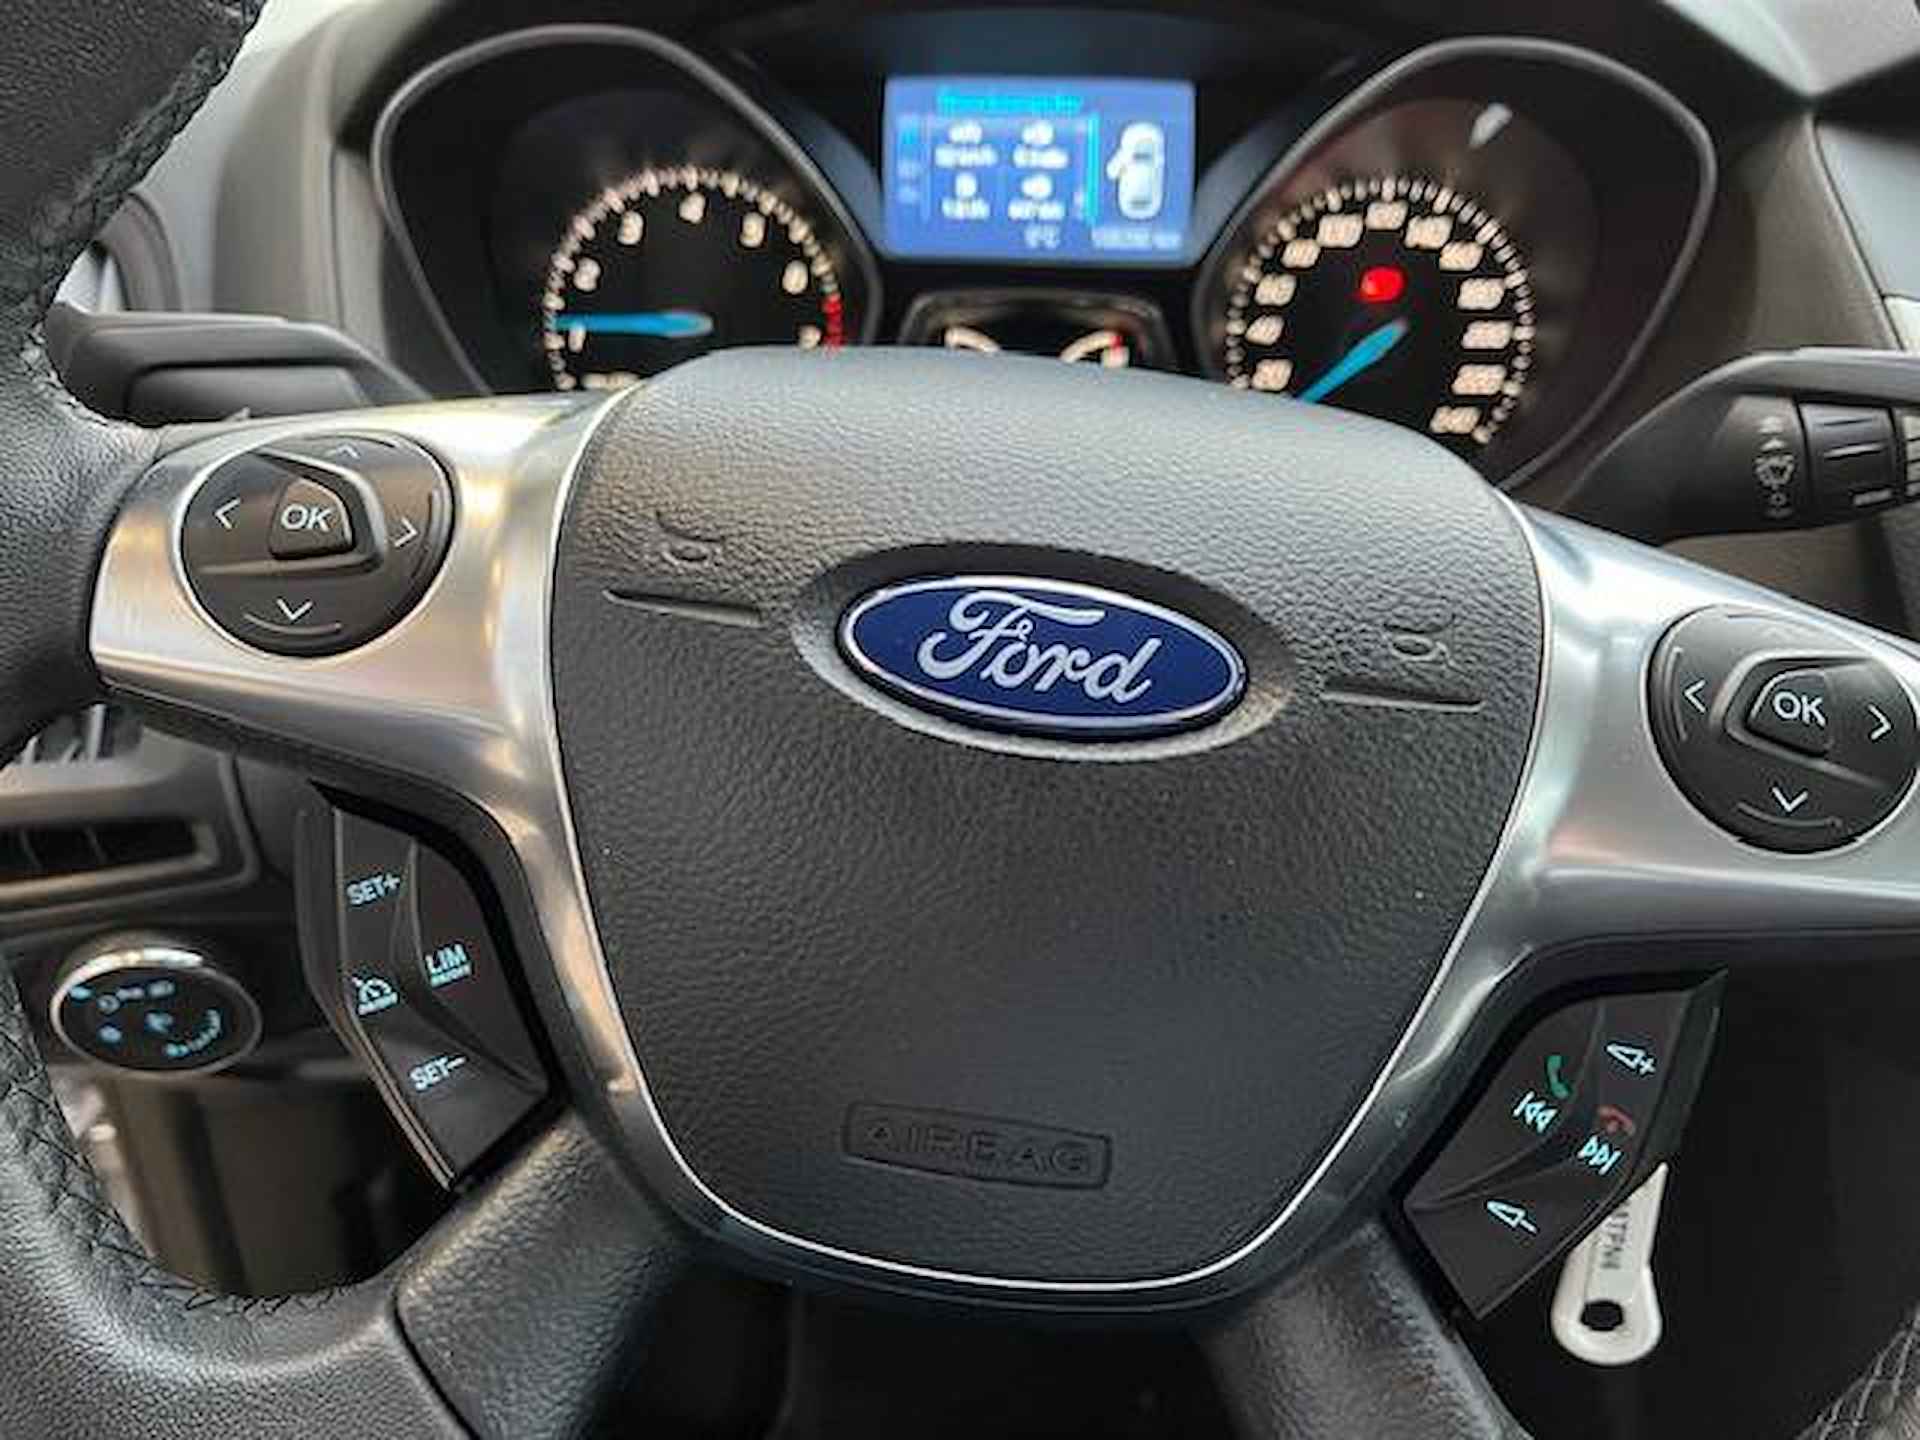 Ford Focus 1.6 TI-VCT Lease Trend - 15/16